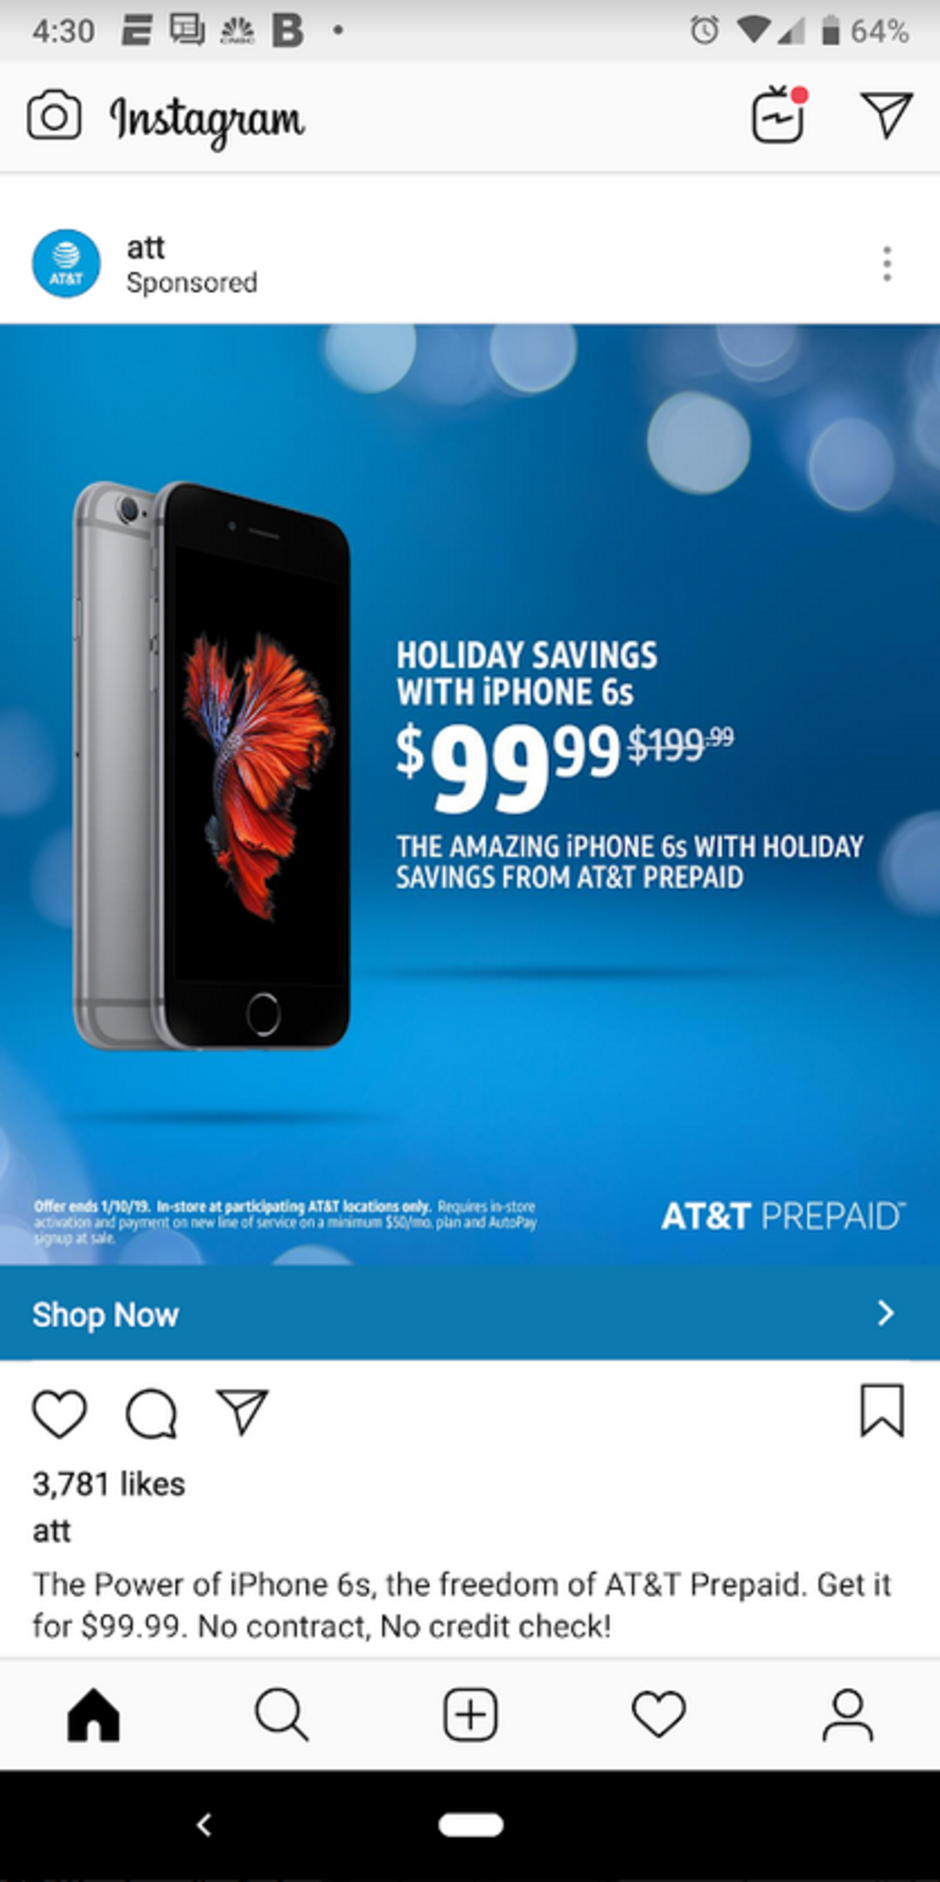 The Apple iPhone 6s is half off at $99.99 from AT&amp;amp;T Prepaid - AT&amp;T has the Apple iPhone 6s for $99.99 ($100 off) for prepaid customers; conditions apply